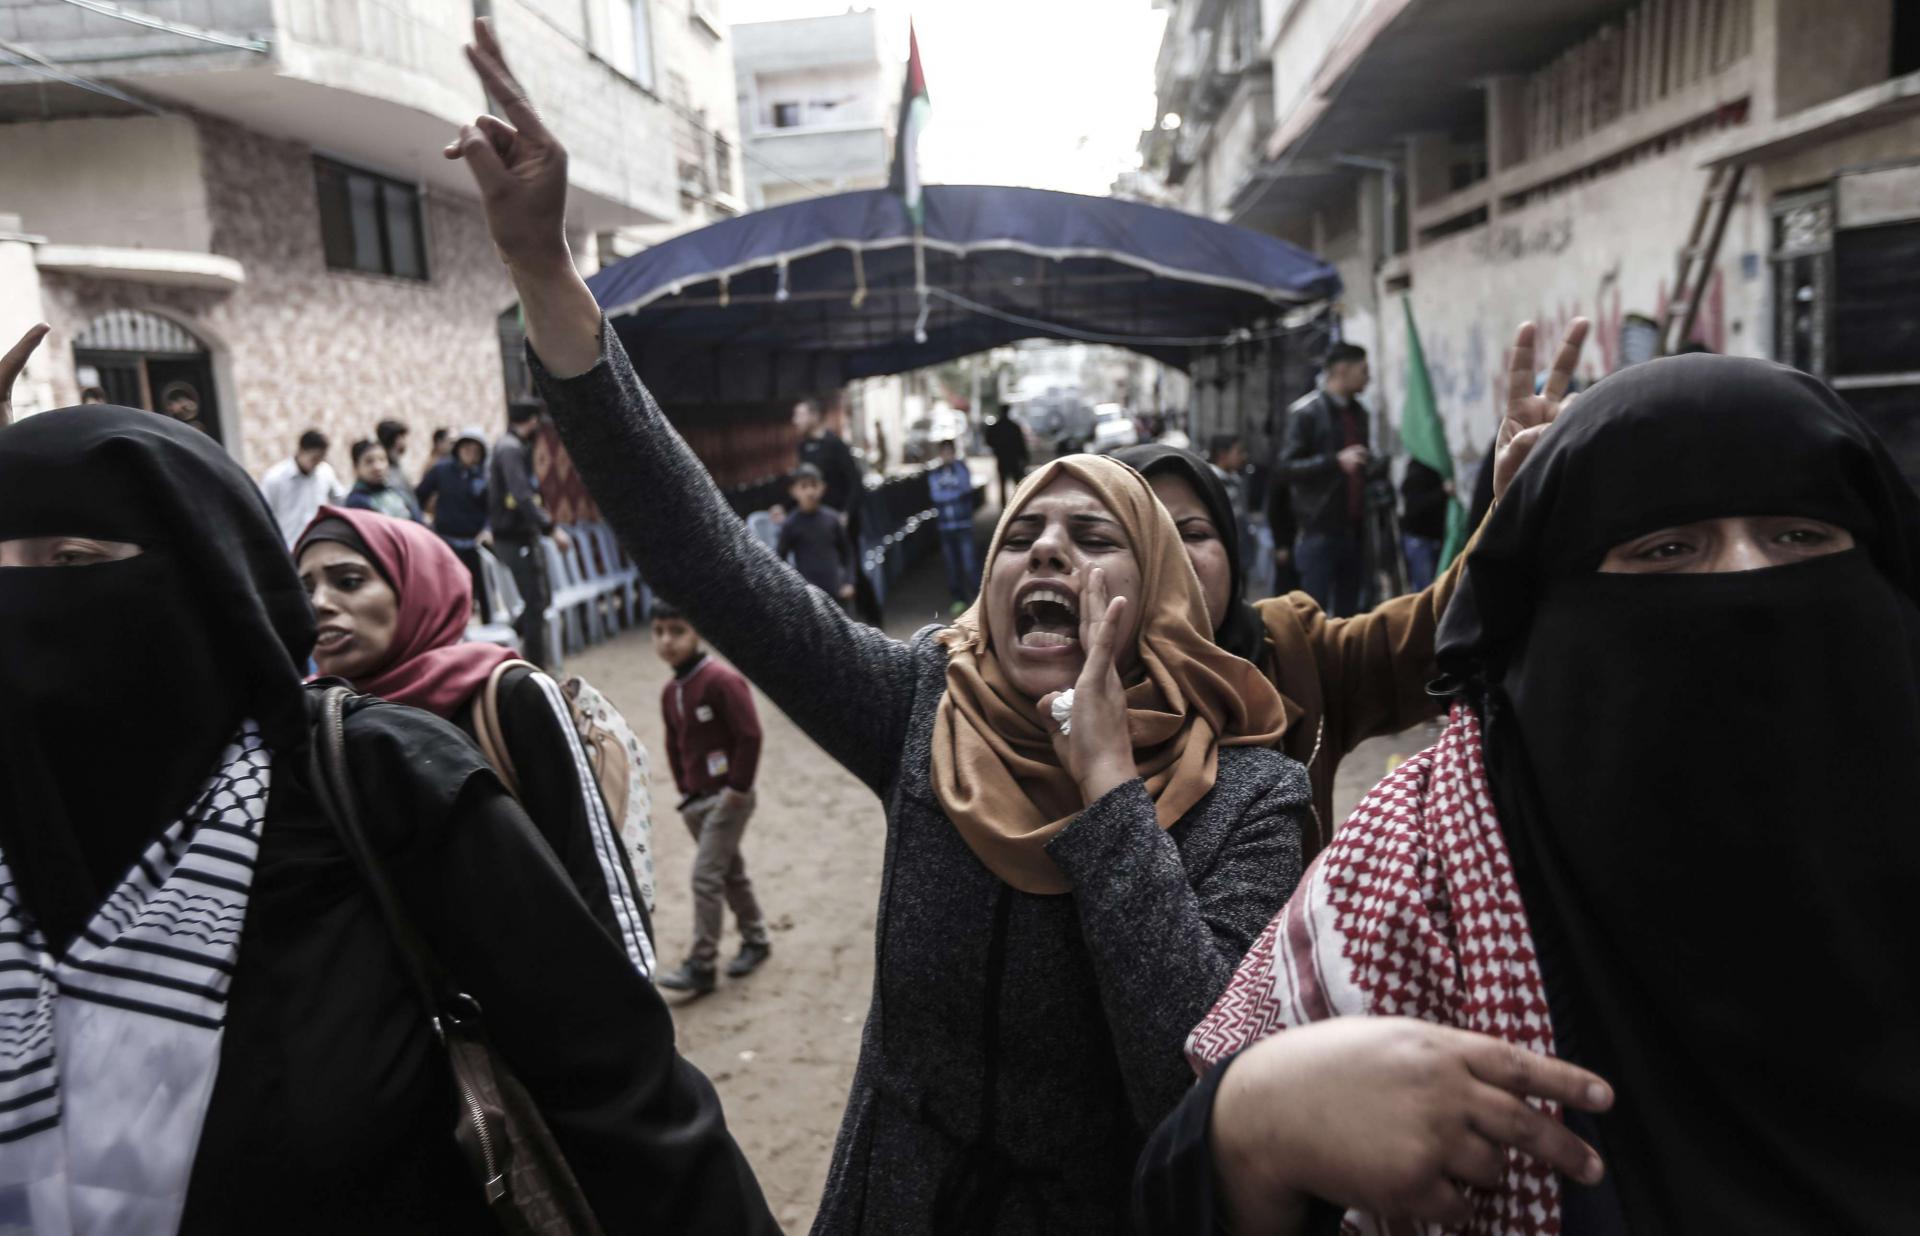 The clashes come a day after a Gaza woman was shot dead by Israeli forces during weekly protests